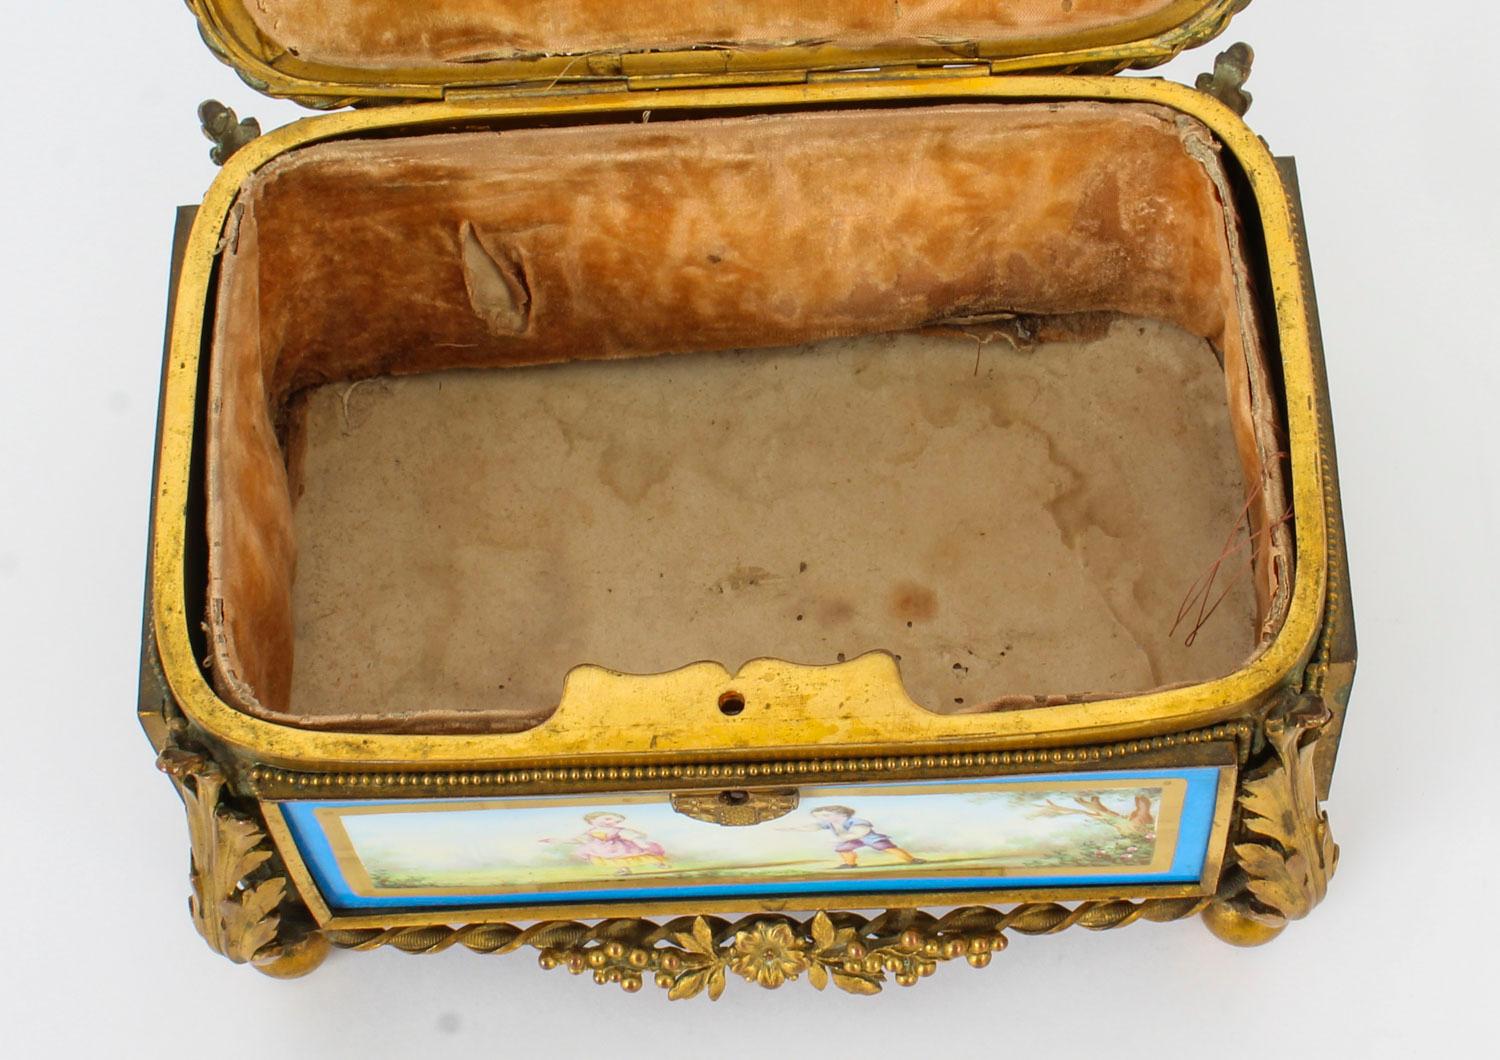 Antique French Sevres Porcelain and Ormolu Jewellery Casket, 19th Century 9